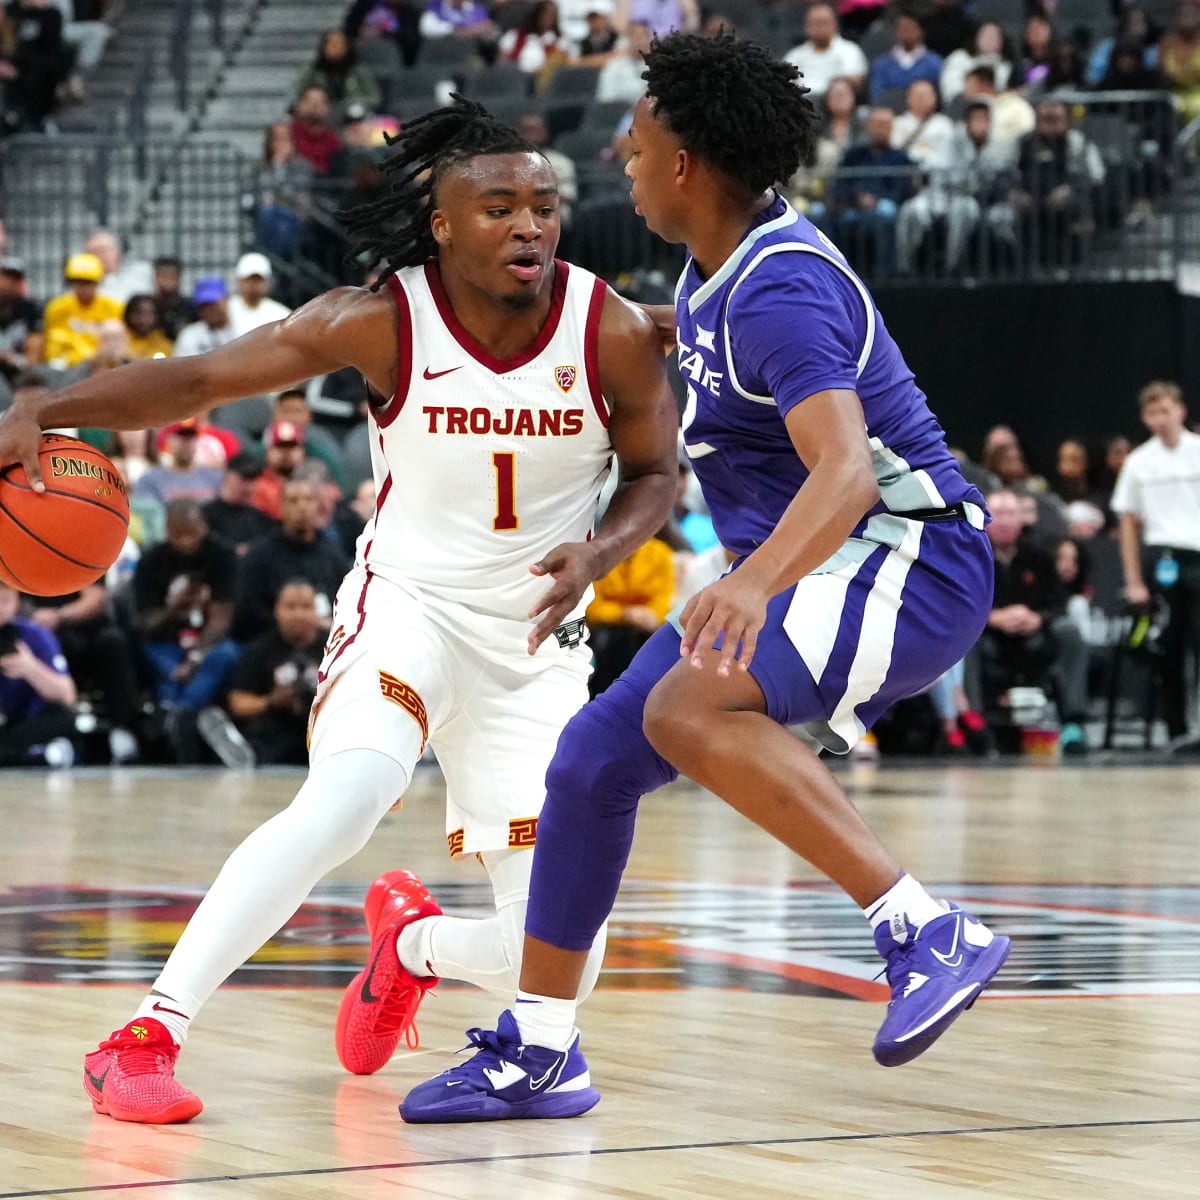 Rising USC Star Isaiah Collier Overcomes Adversity: A Look at His Inspiring Journey and NBA Prospects